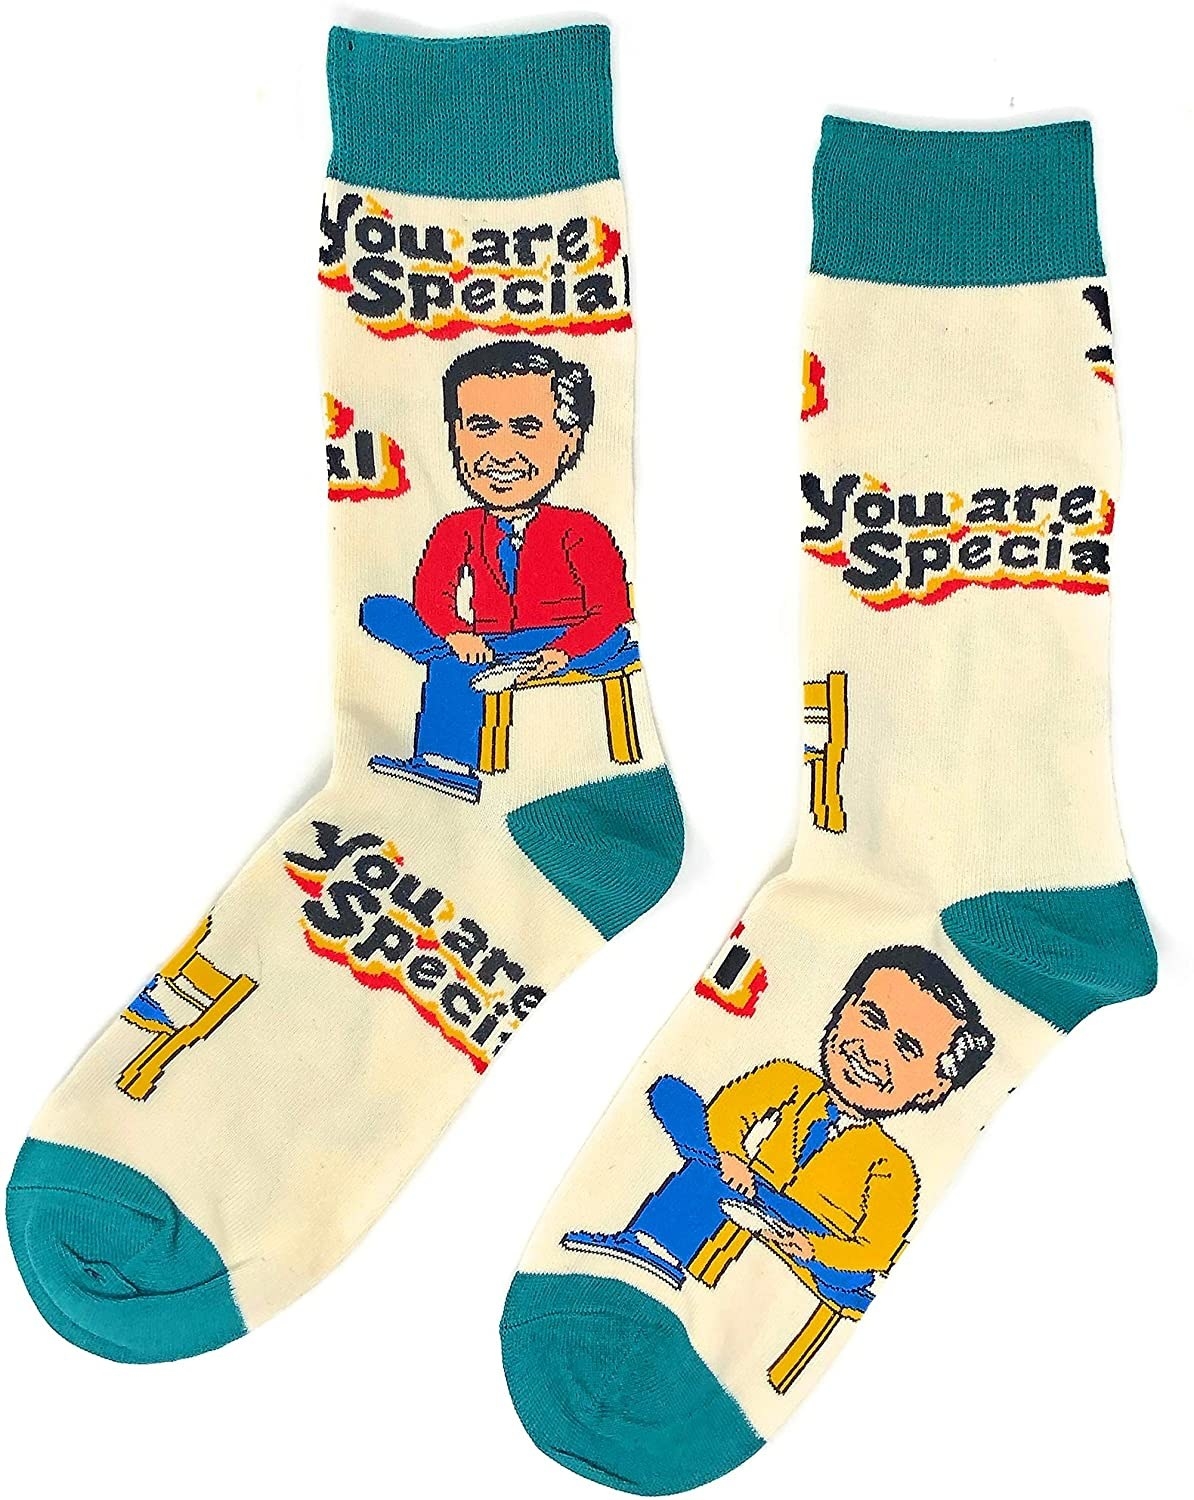 a pair of socks with print of mr rogers changing his shoes that says you are special 